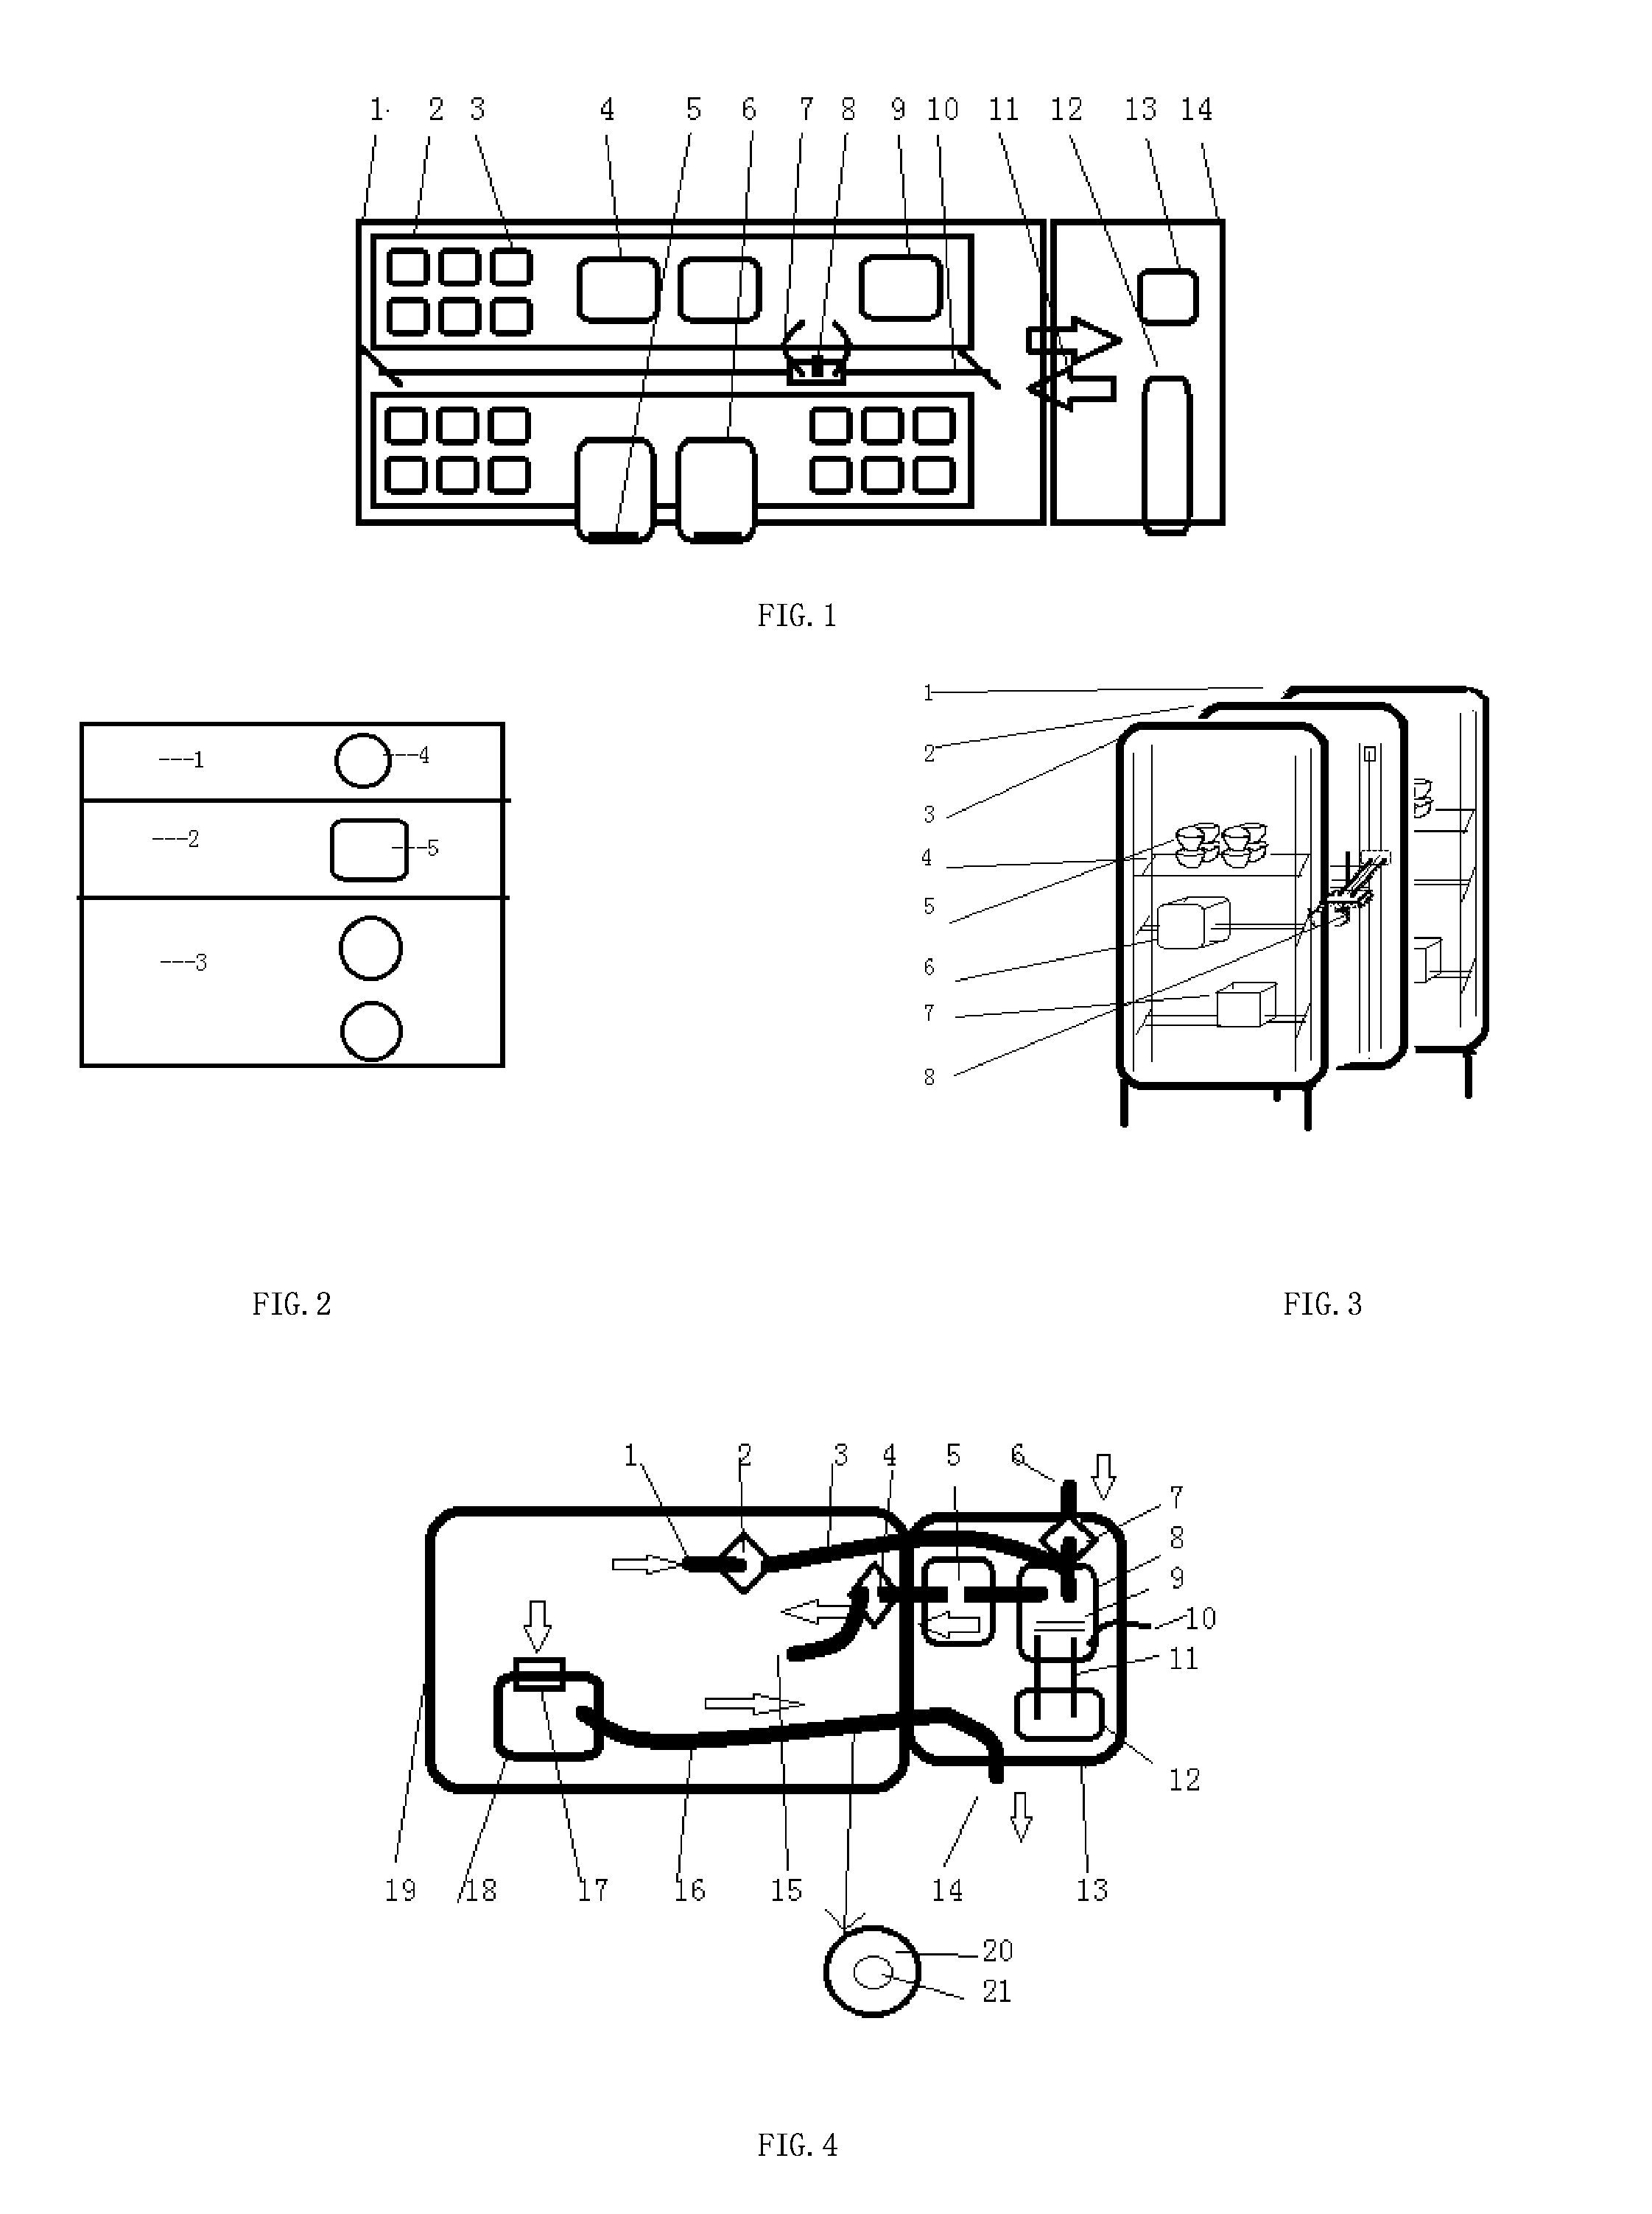 System for Automatically Cooking and Selling Frozen Food